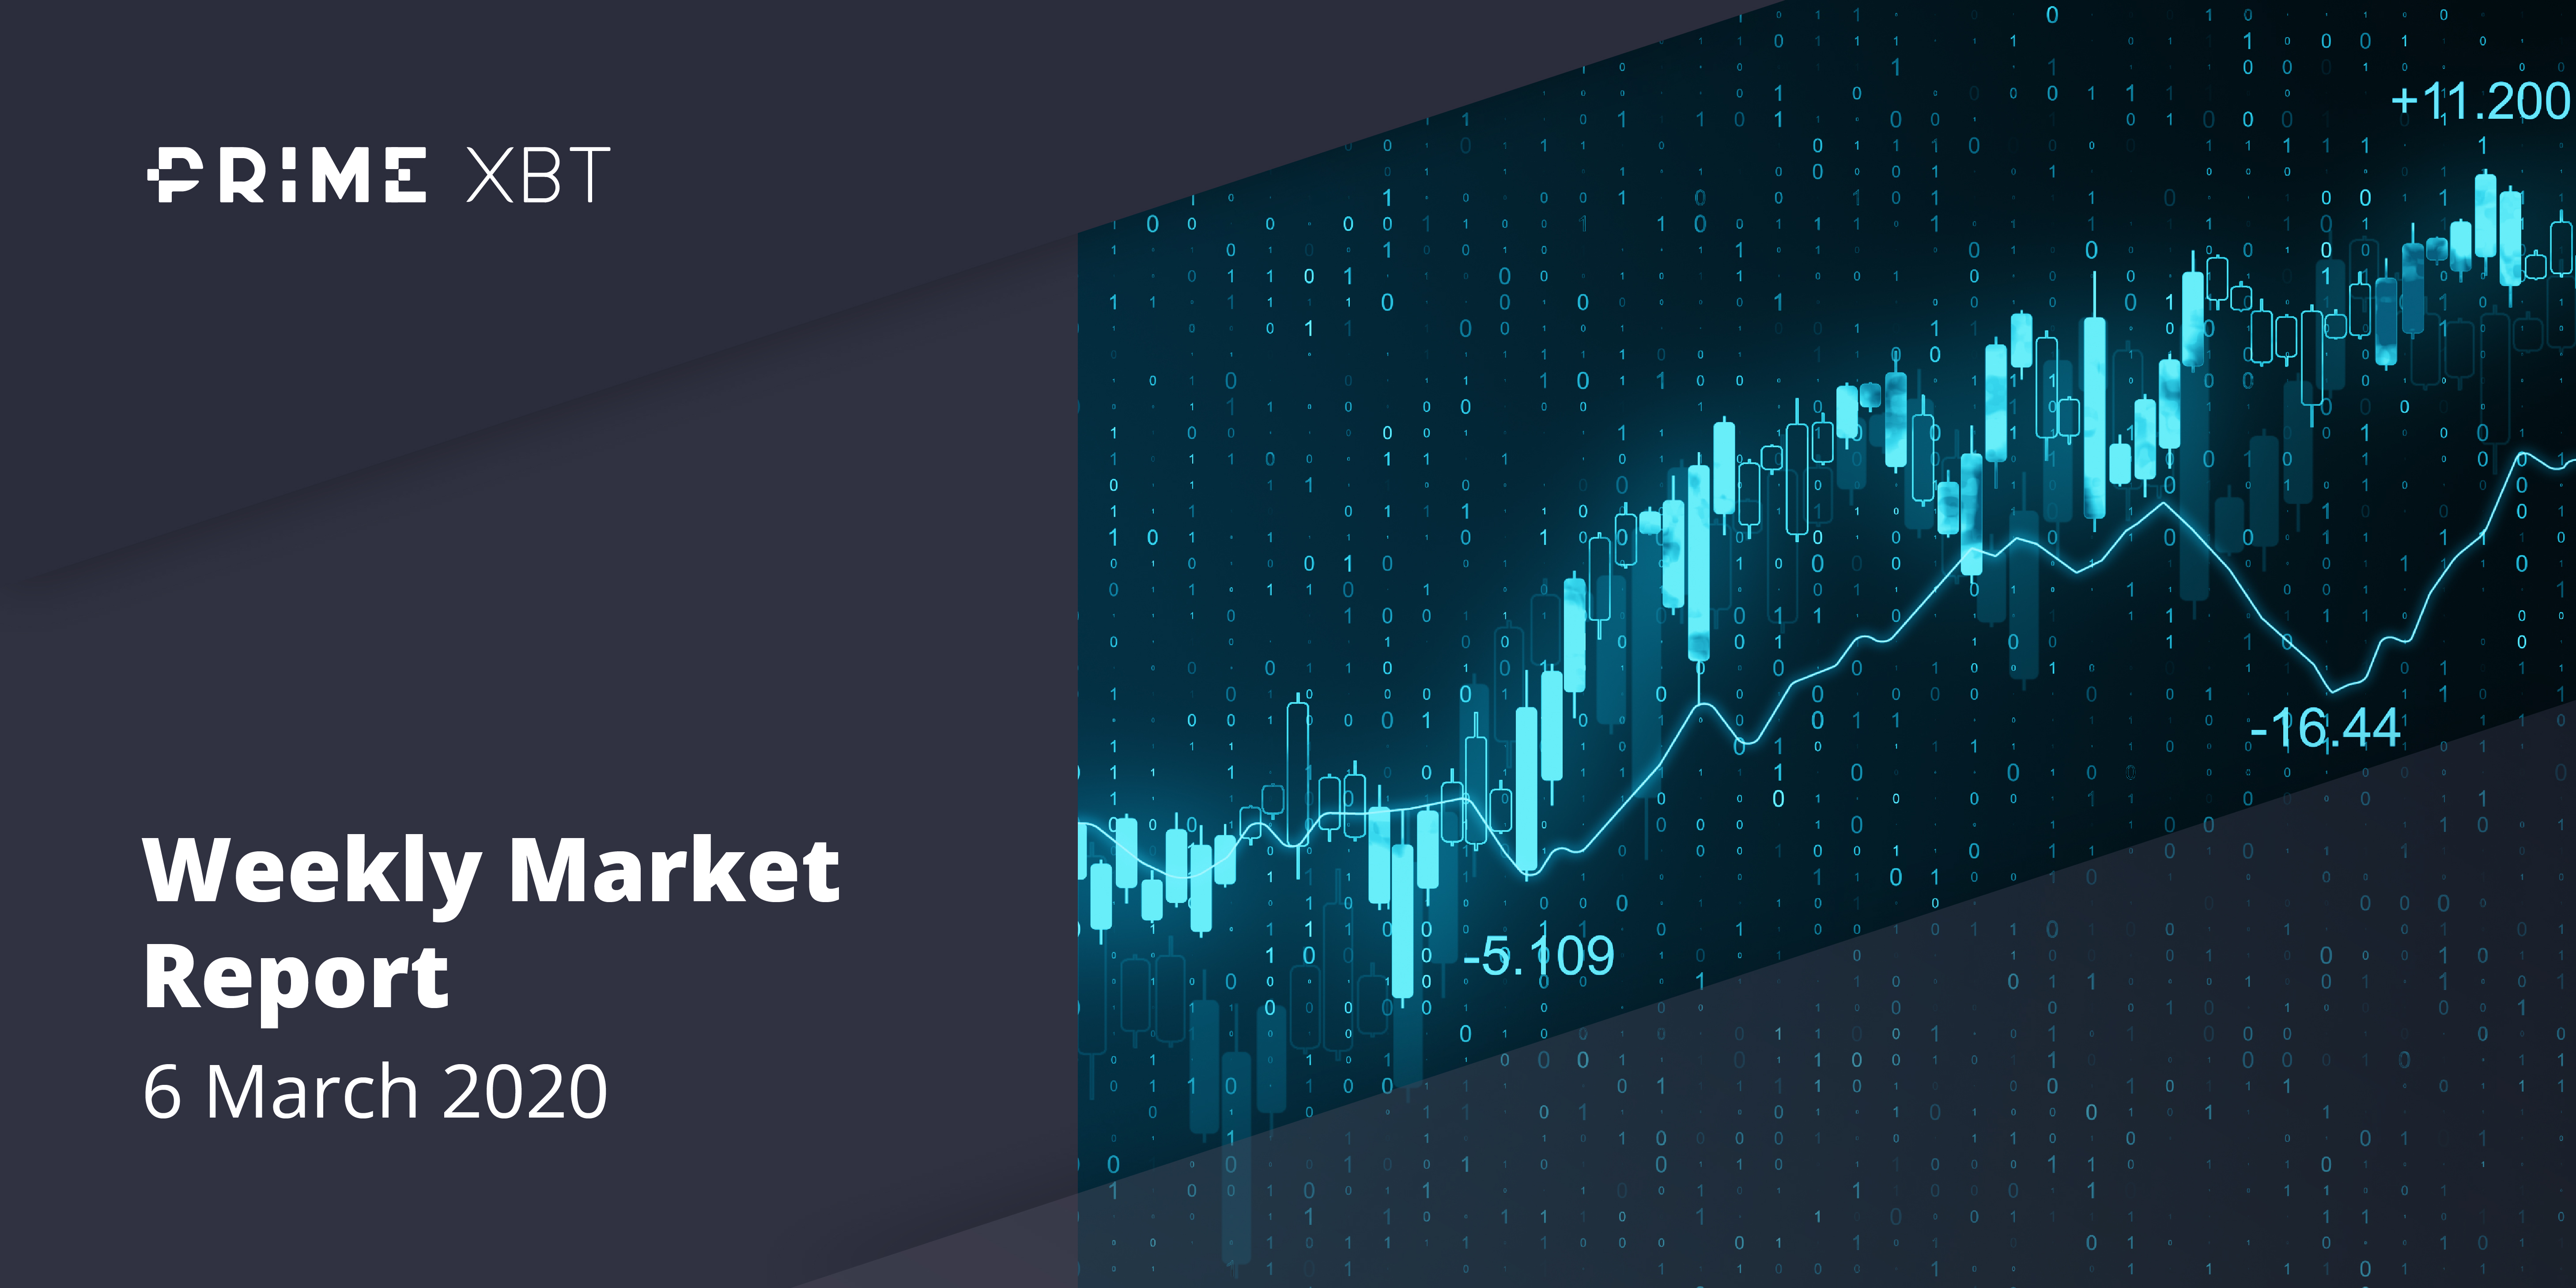 Crypto Market Report: Mixed week for Bitcoin Price but Support Level Held, BTC ATMs climbing as is Institutional Futures Interest - 2020 03 06 20.50.45